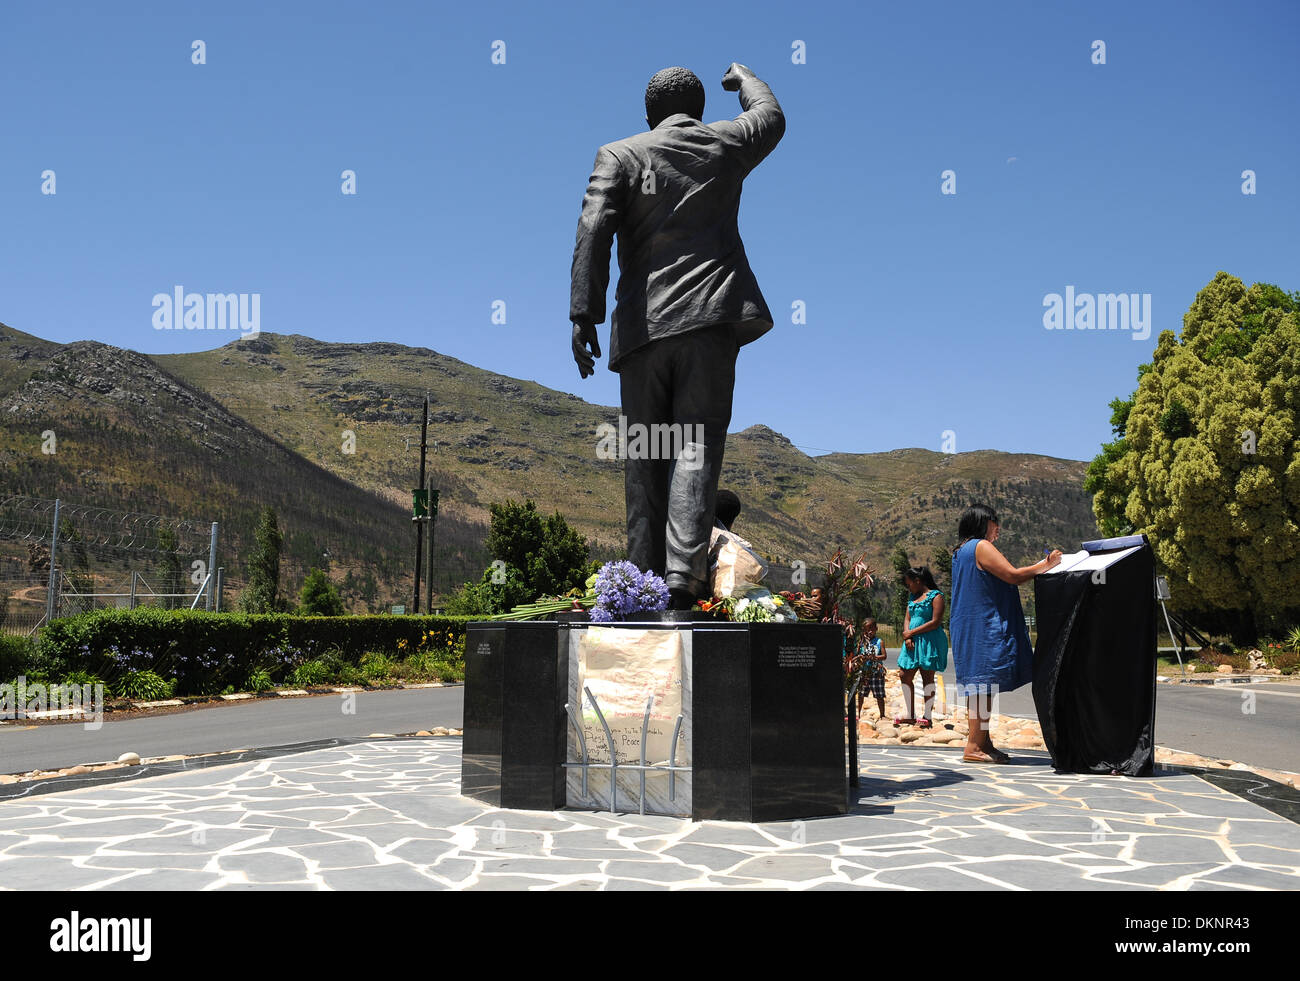 Paarl, South Africa. 8th Dec 2013. visitors place flowers at the statue of Nelson Mandela at the entrance of the Groot Drakenstein Prison formerly known as the Victor Verster Prison in Paarl, just outside of Cape Town. The statue is at the place Nelson Mandela walked out of prison, a free man, on 11 February 1990. Photo by Roger Sedres/ImageSA Stock Photo